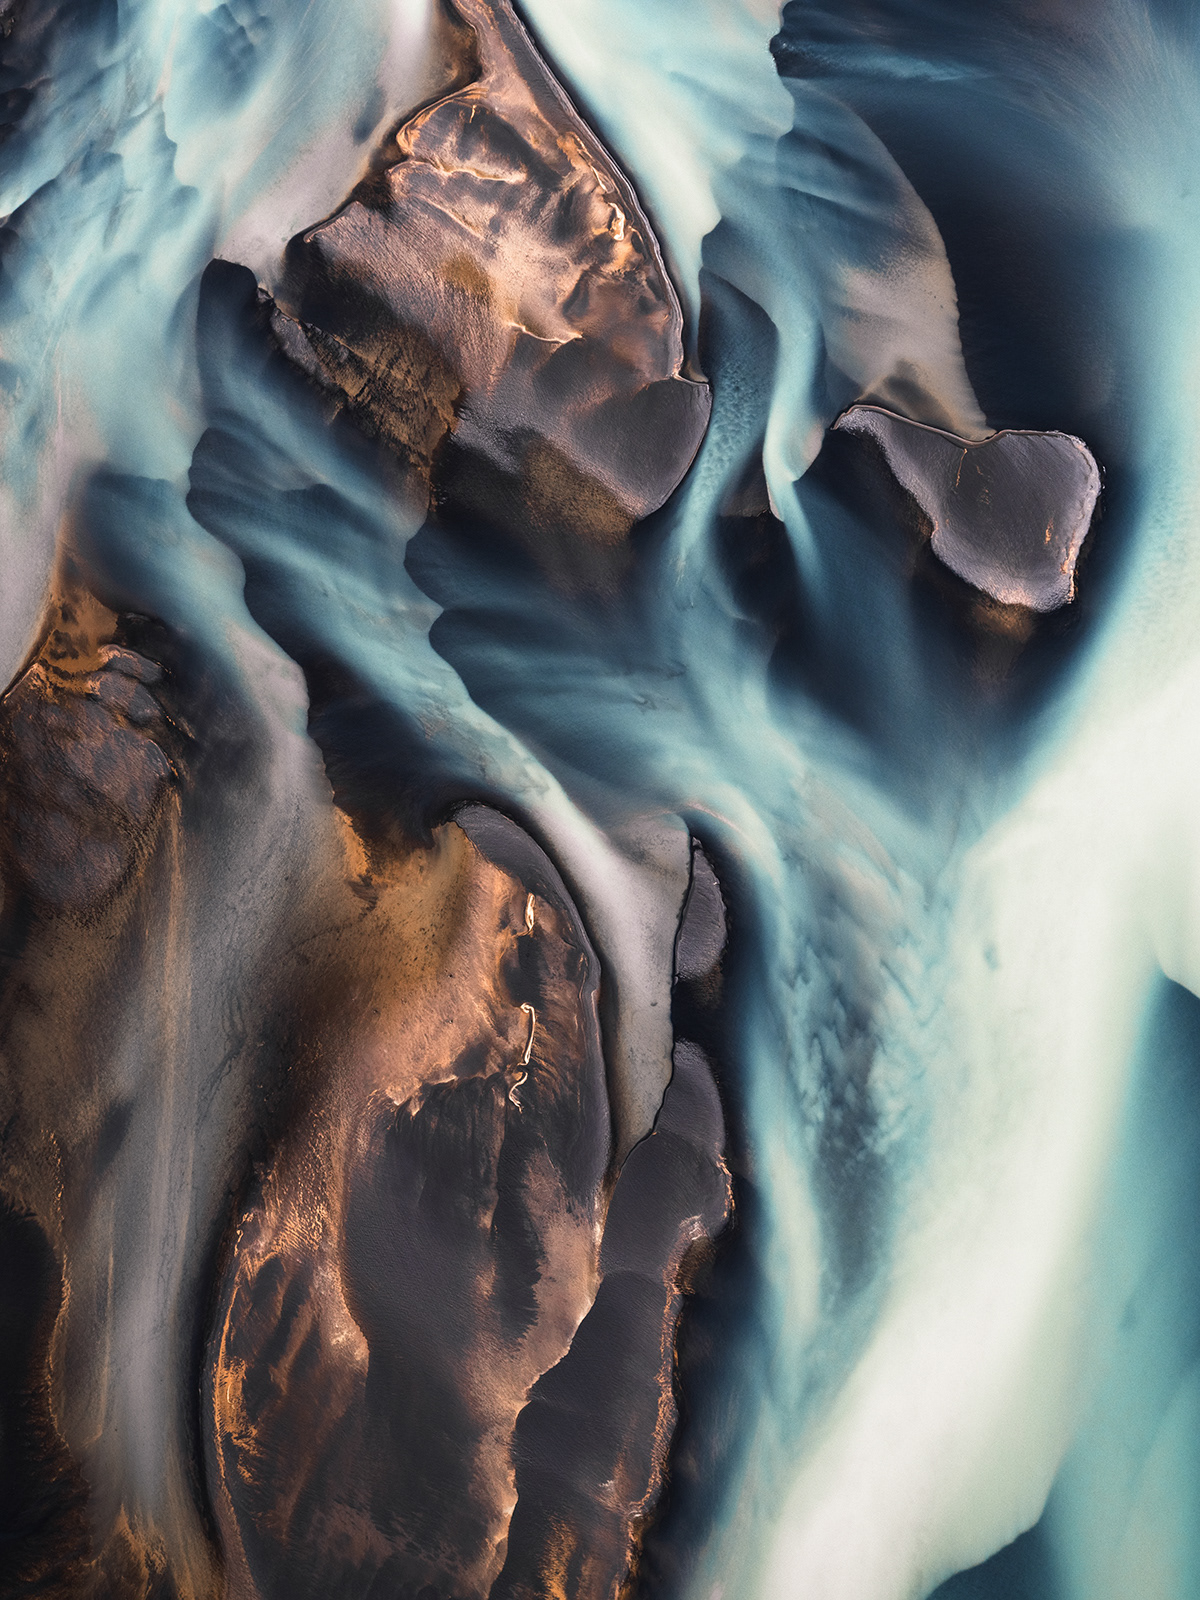 abstract Aerial Aerial Photography drone FINEART glacier iceland Nature Photography  rivers